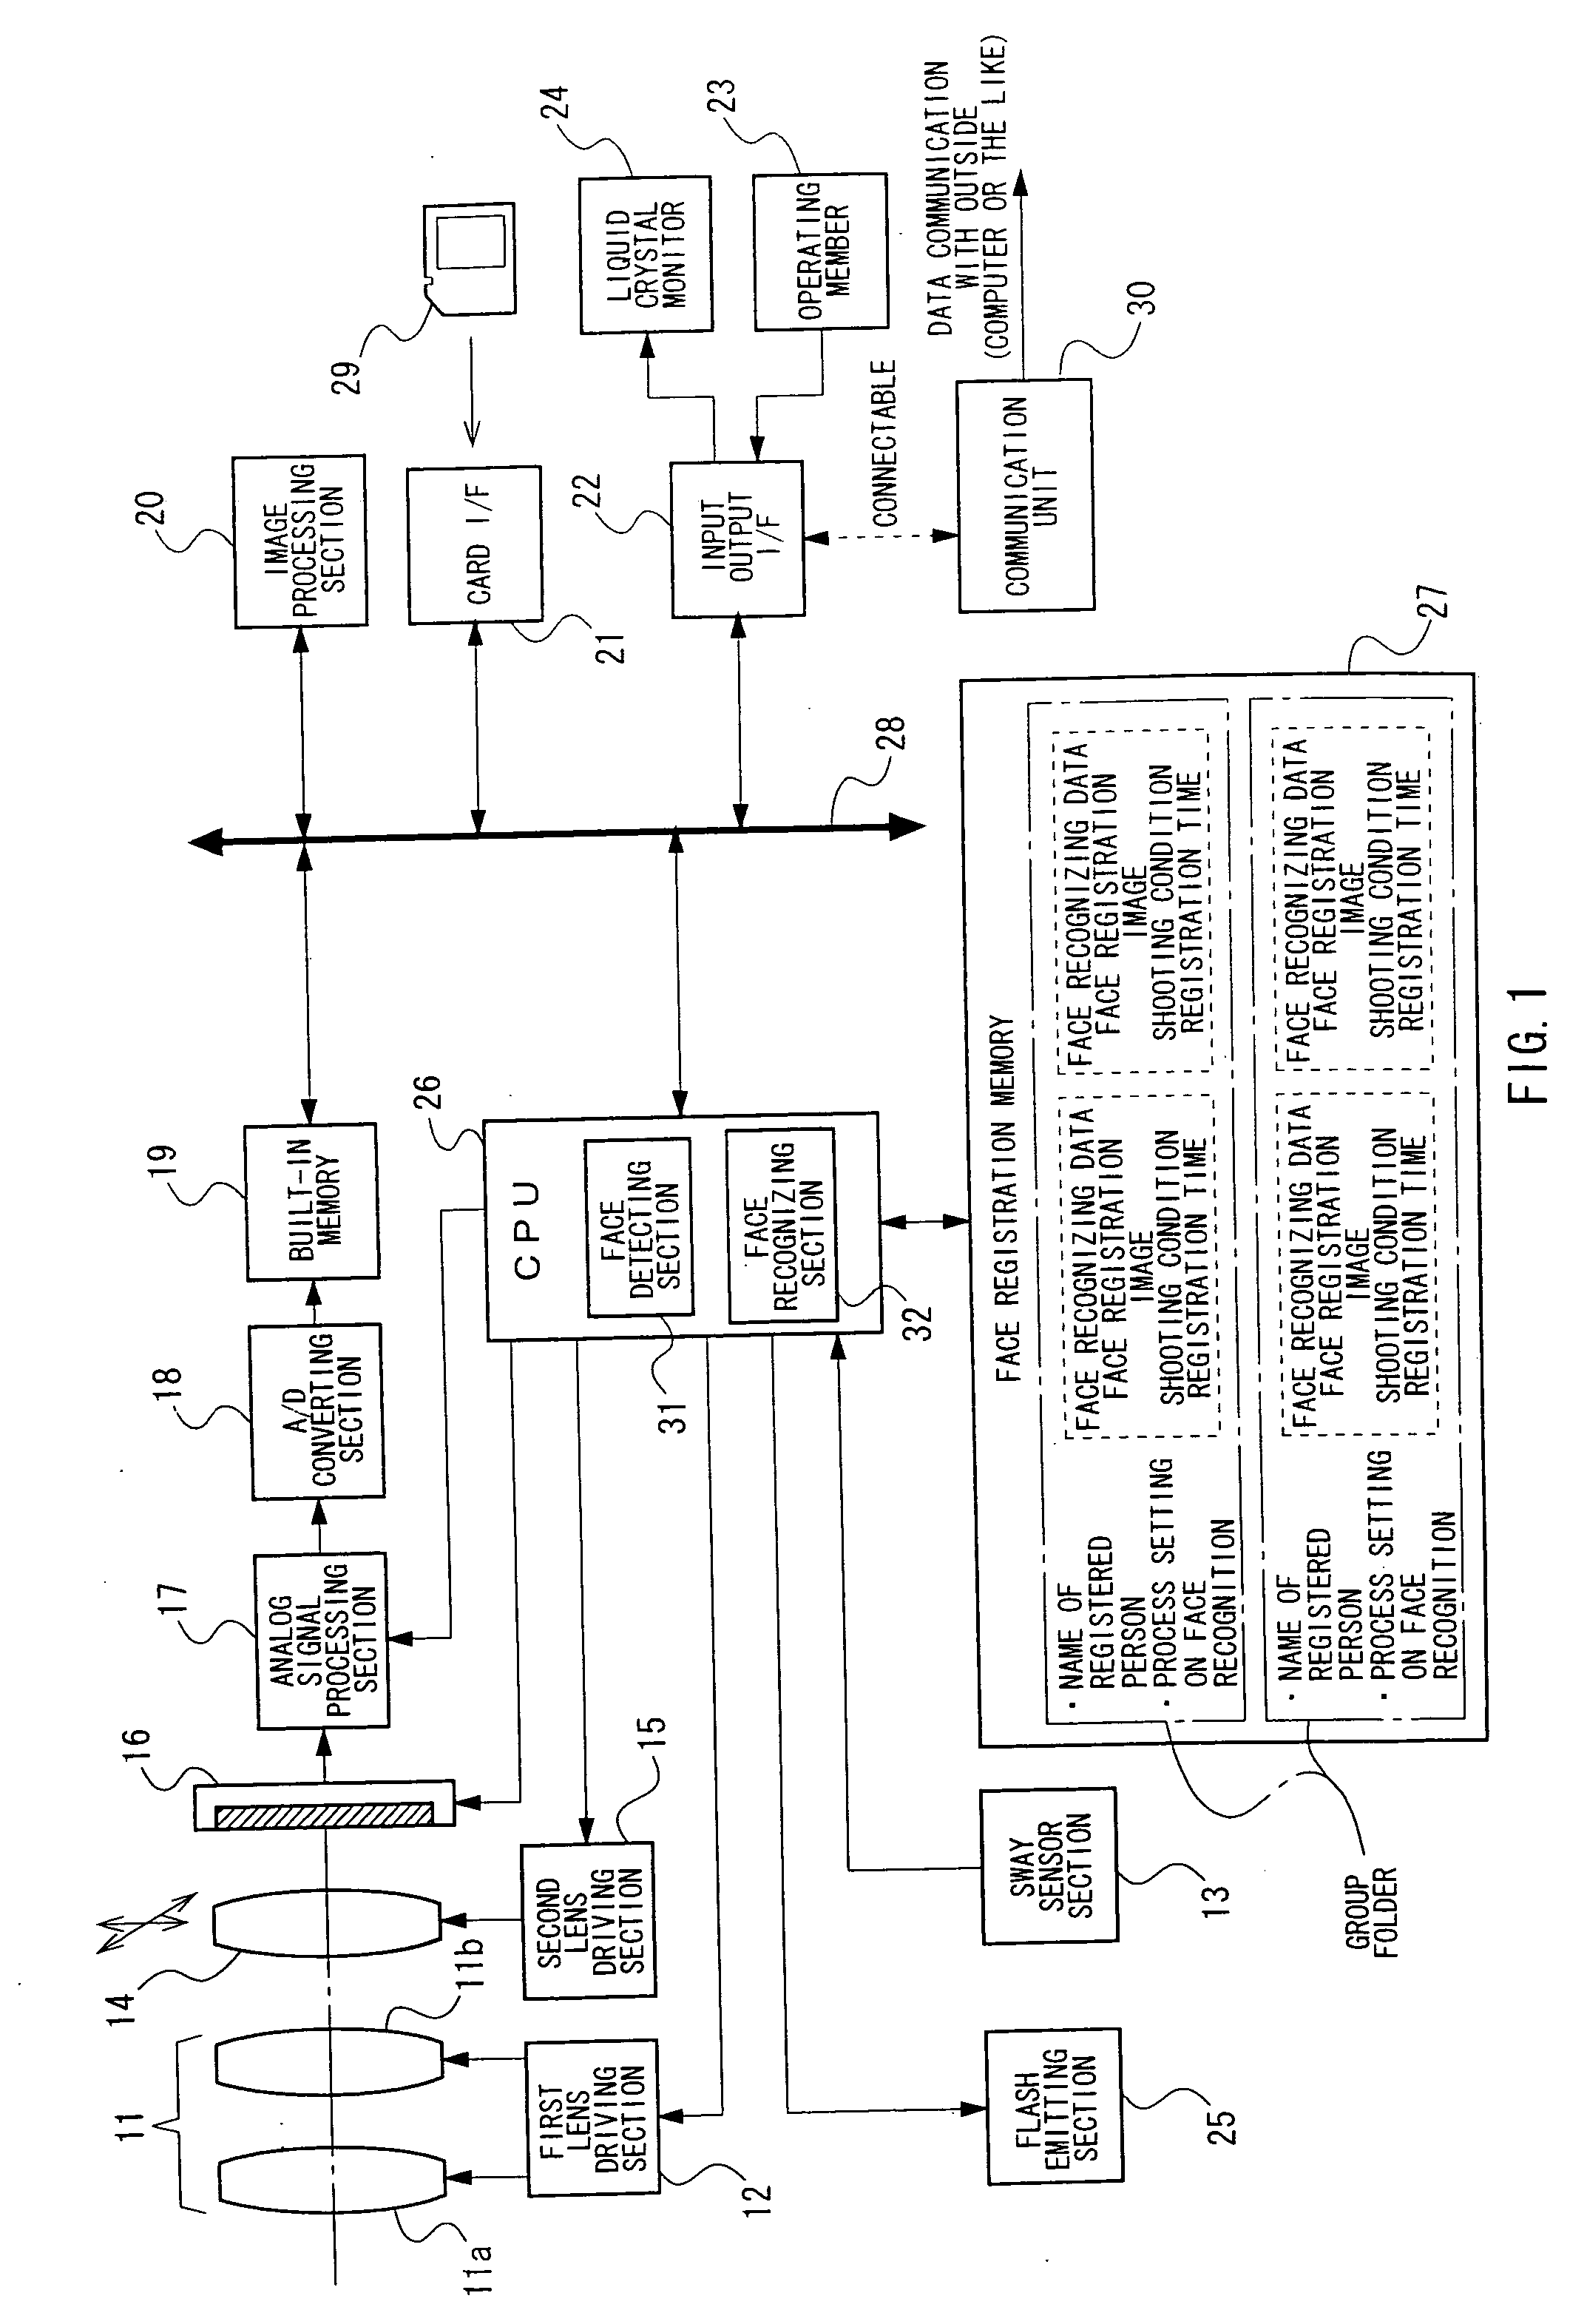 Electronic Camera and Image Processing Device